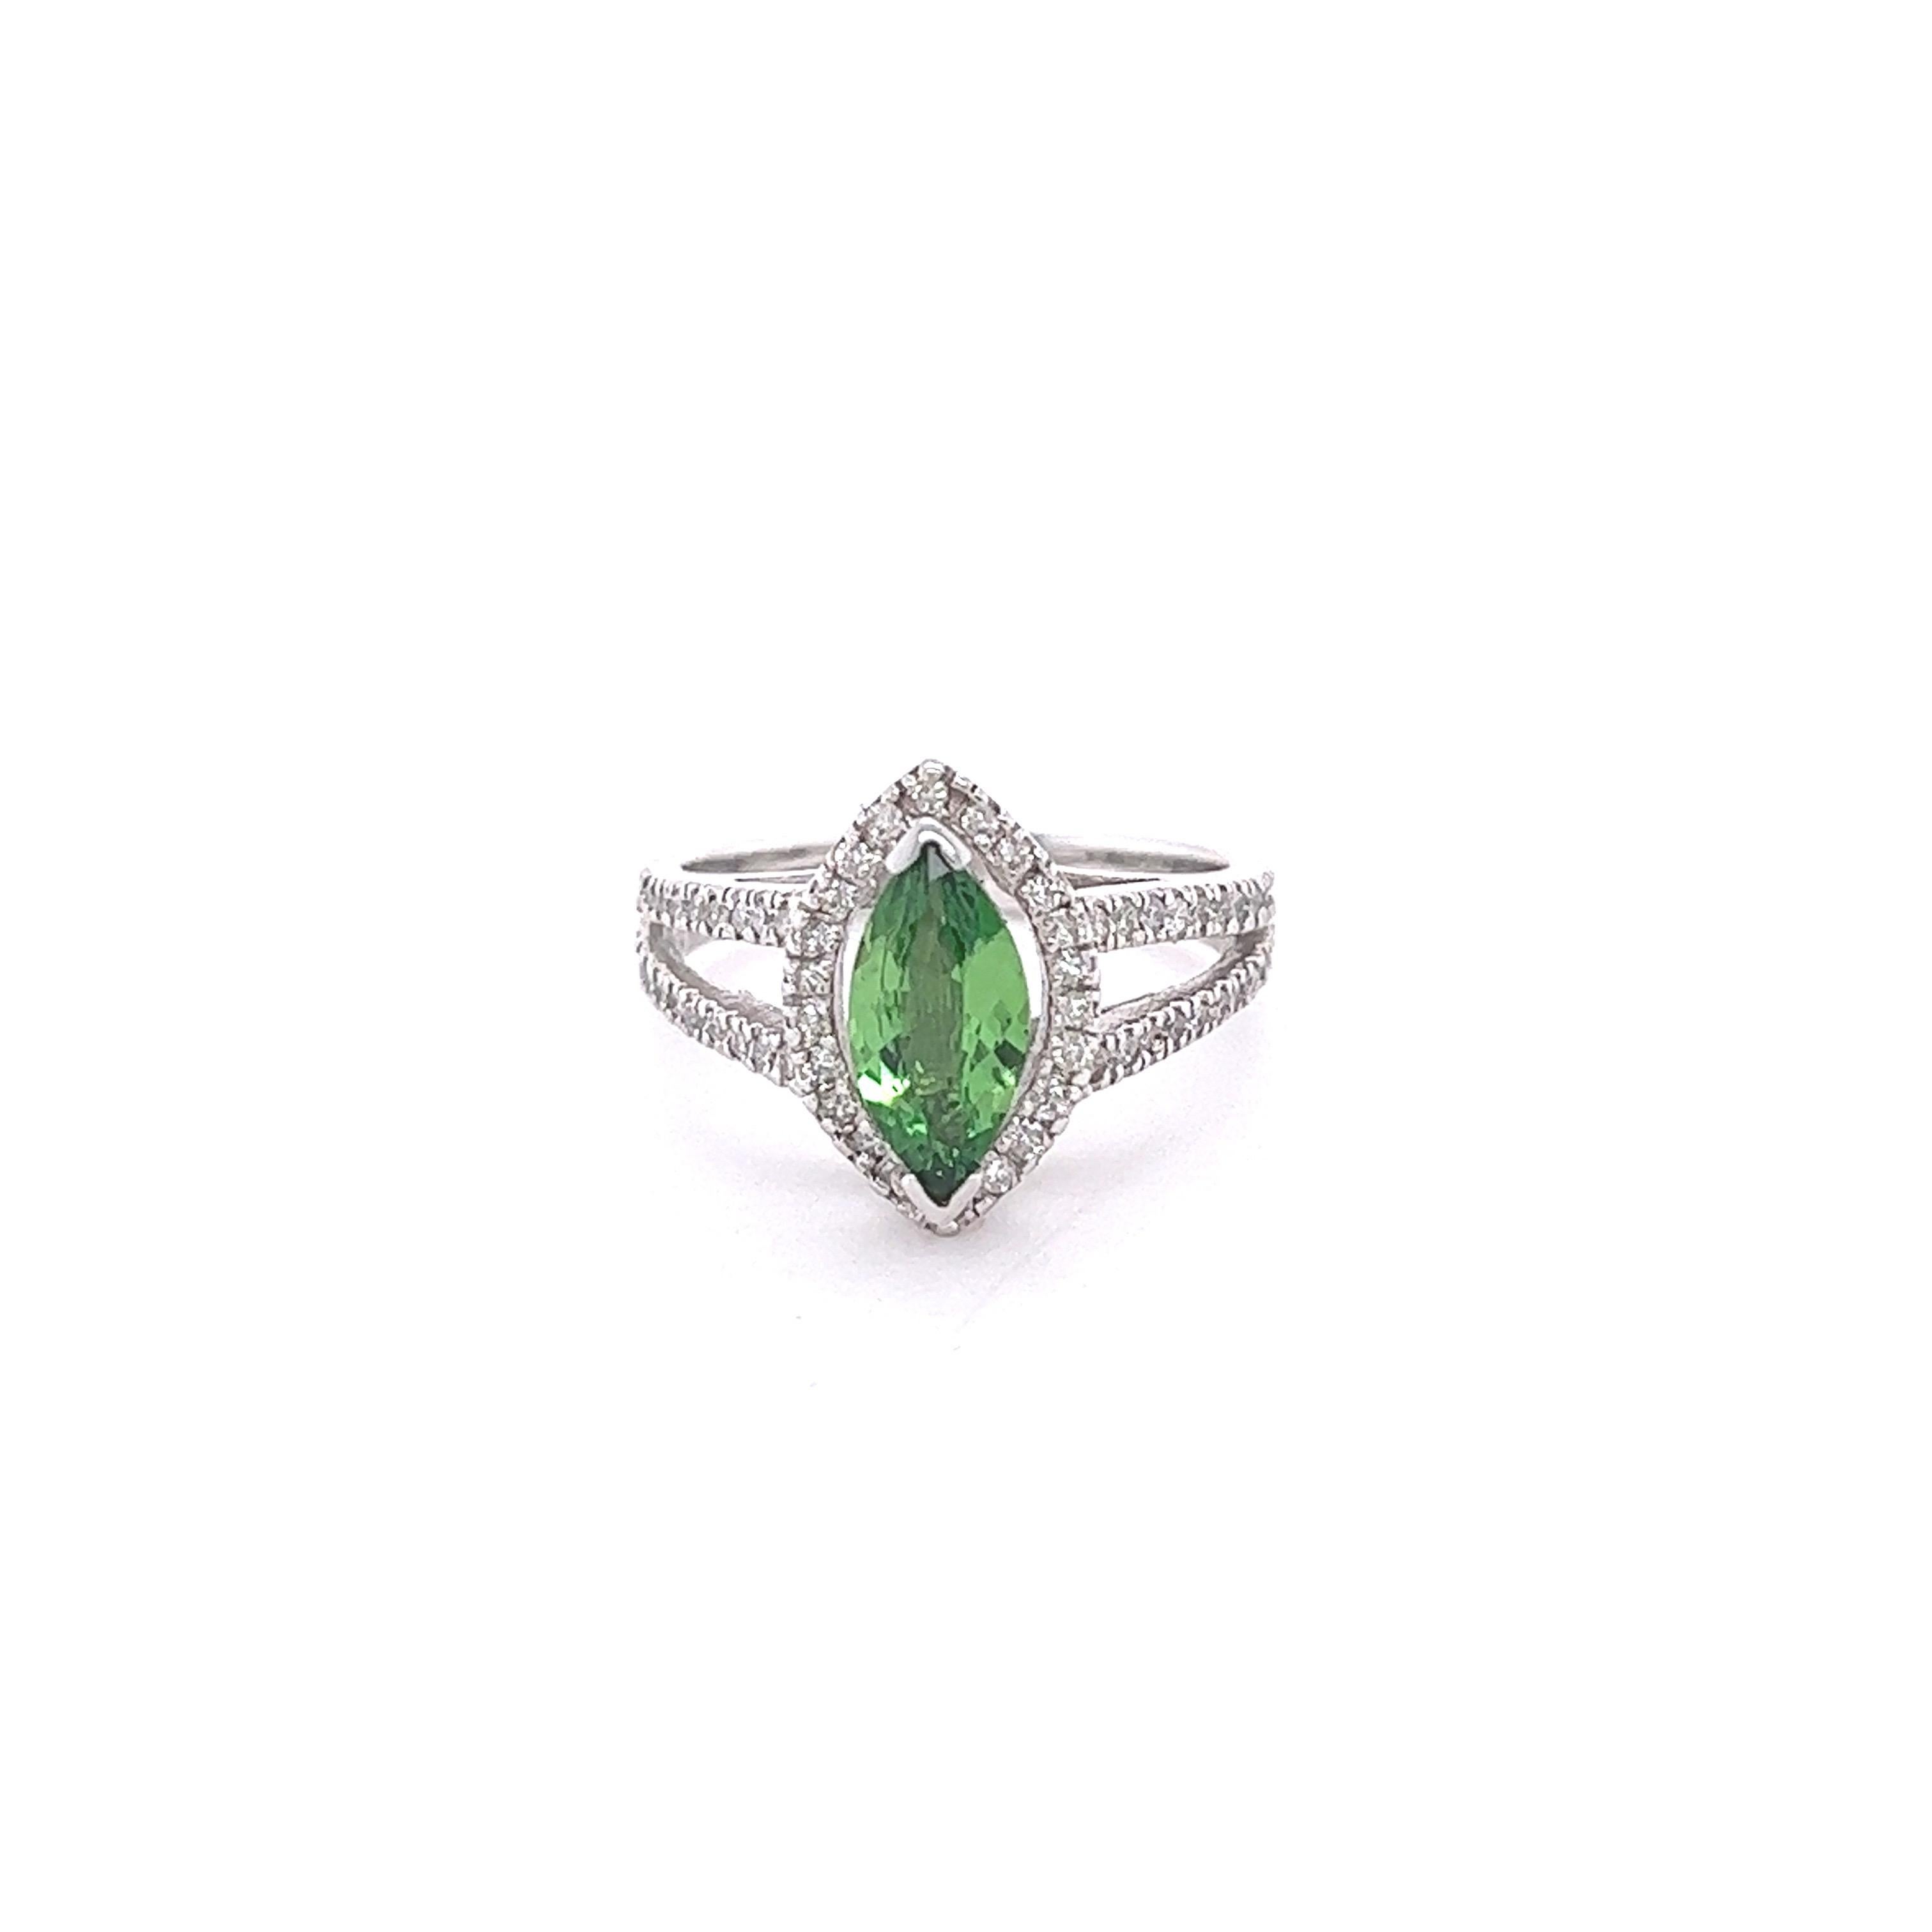 Contemporary 1.62 Carat Marquise Cut Tsavorite Diamond White Gold Engagement Ring For Sale